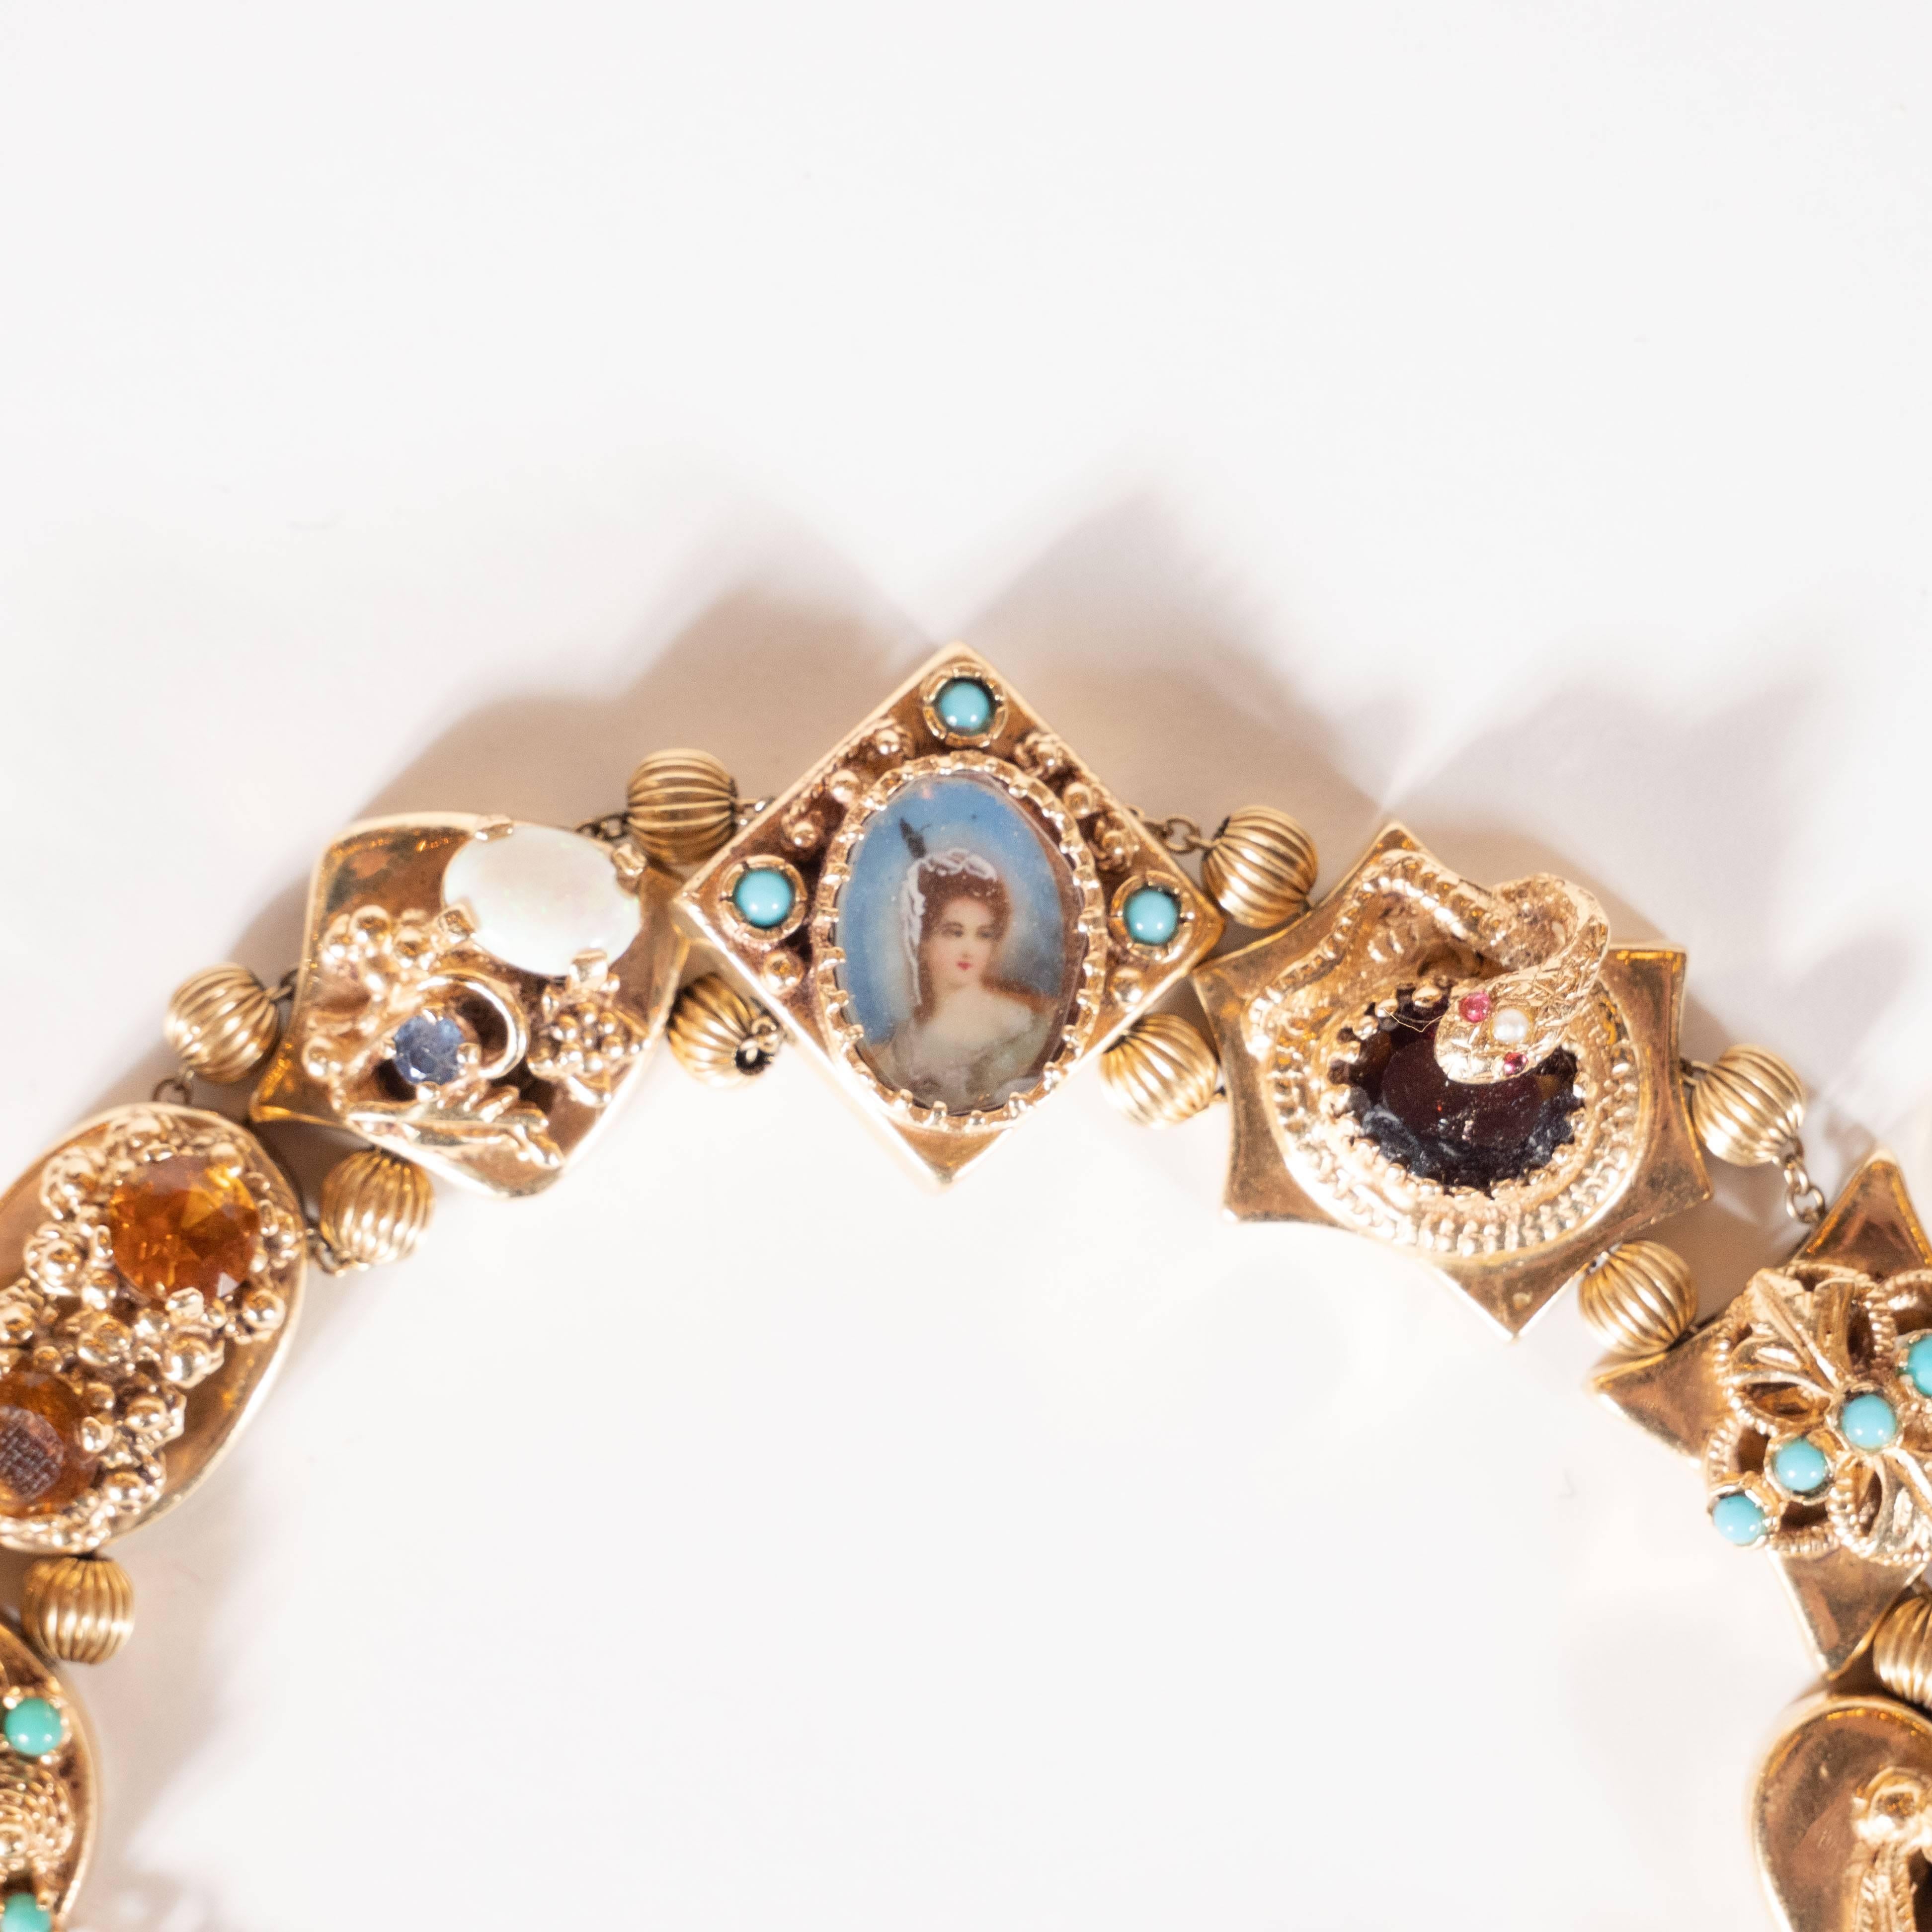 This stunning and elegant slide bracelet was realized in the United States, circa 1940. It features eight charms realized in 14kt gold. There is a square clasp connected to the first beed by two fluted orbs in 14kt gold. The first charm features six